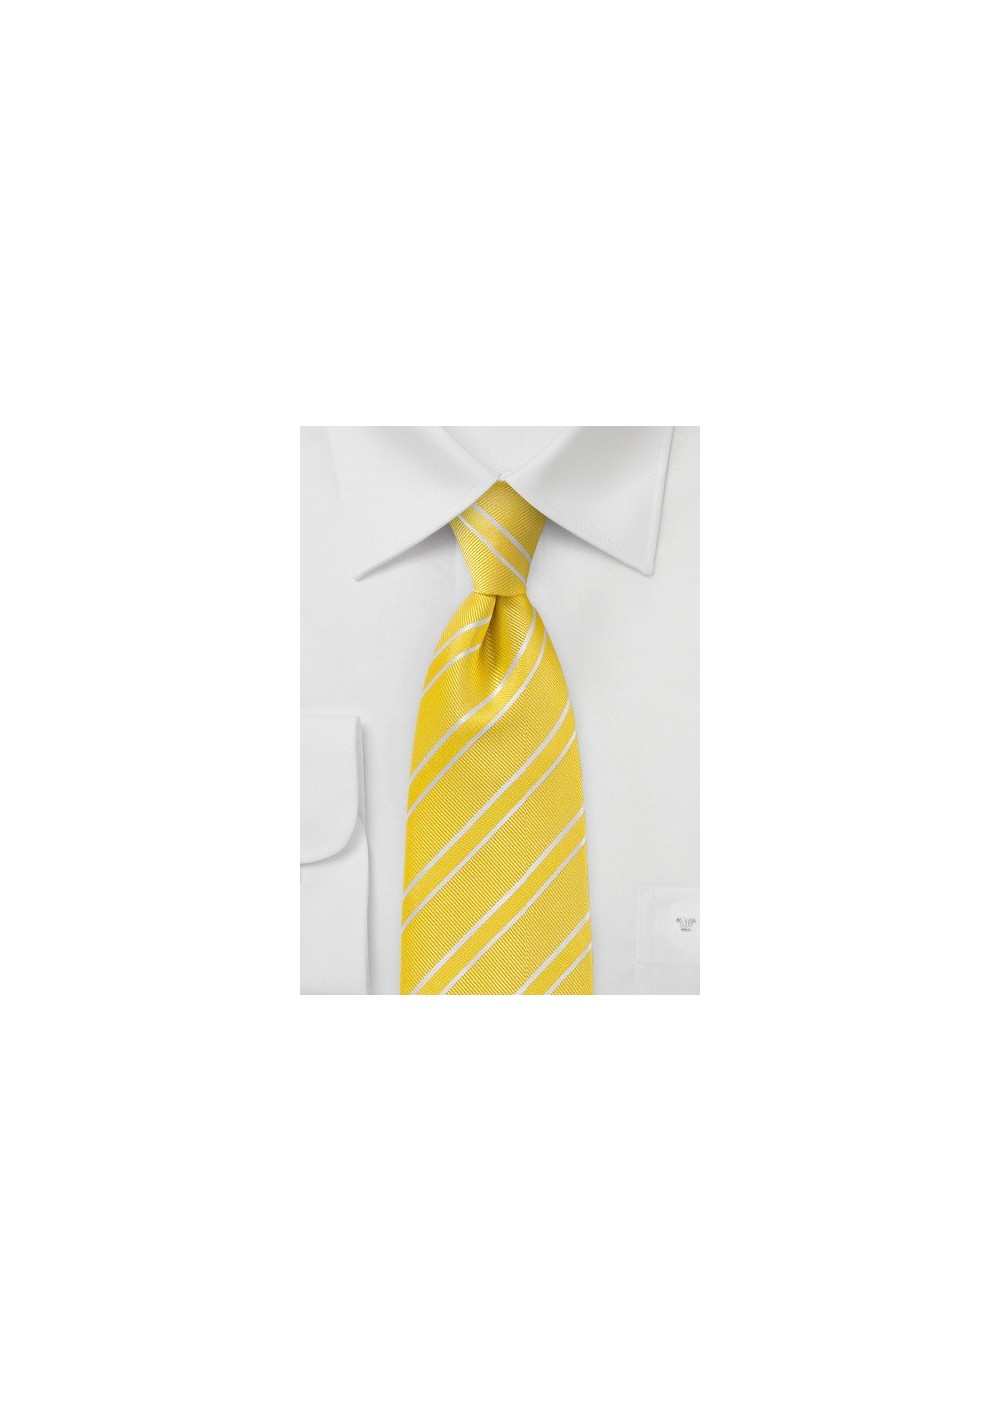 Neon Yellow and White Tie